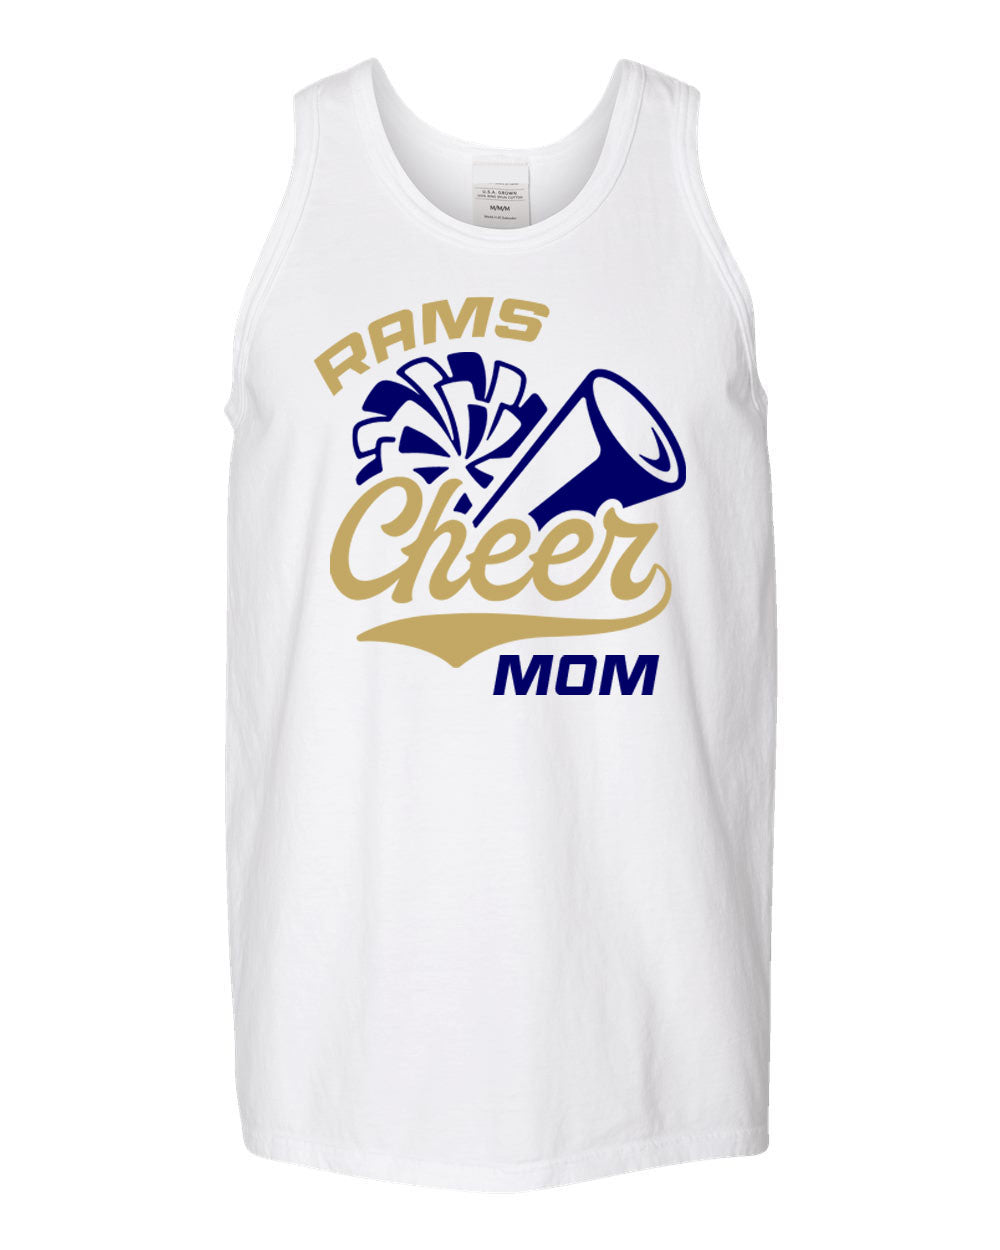 Sussex Middle Cheer Design 1 Muscle Tank Top